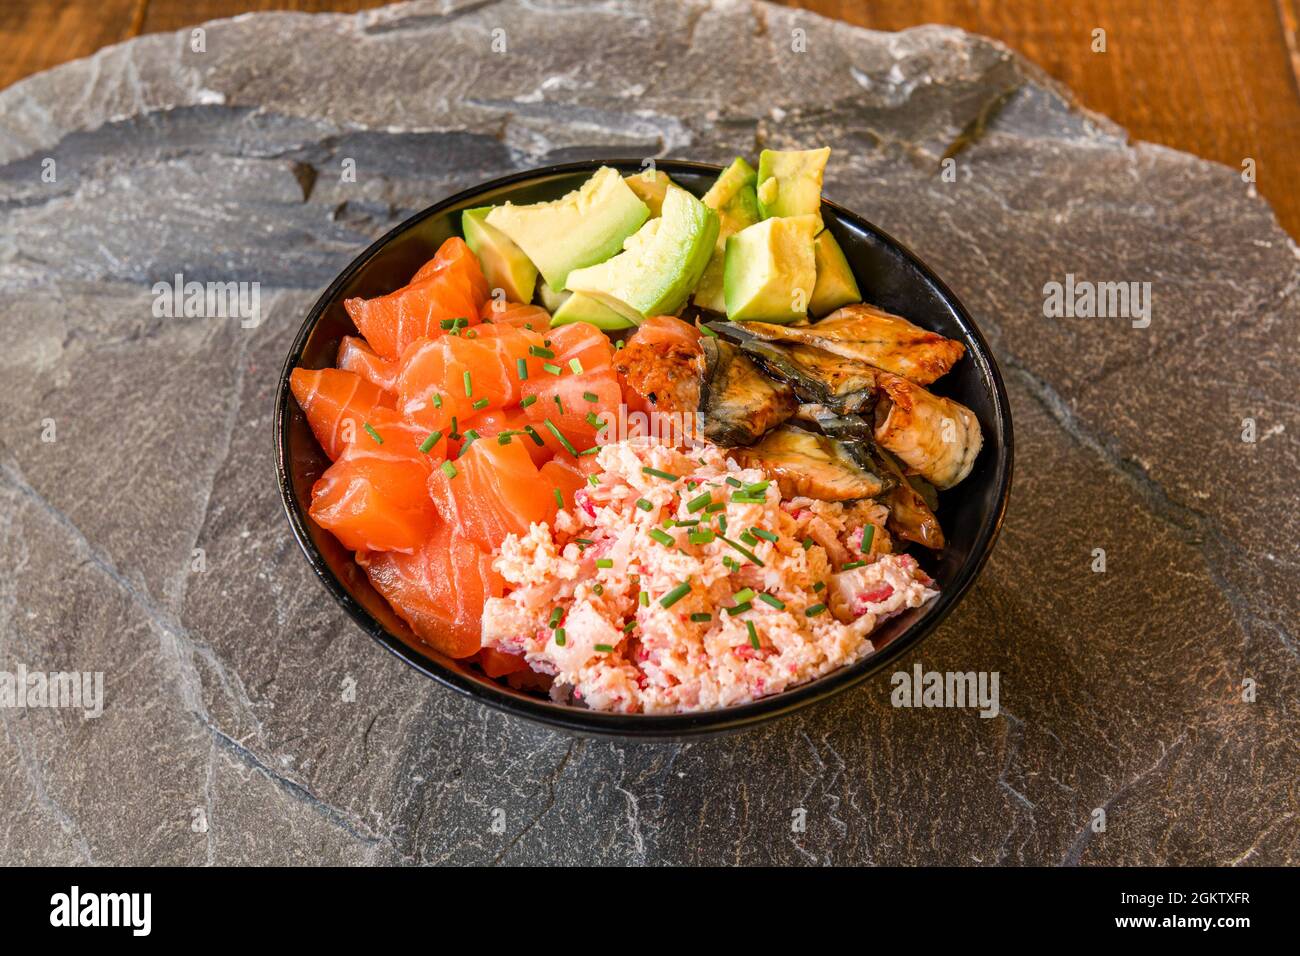 Black fish poke bowl, surimi, diced salmon, green avocado and pieces of stewed eels on gray stone Stock Photo